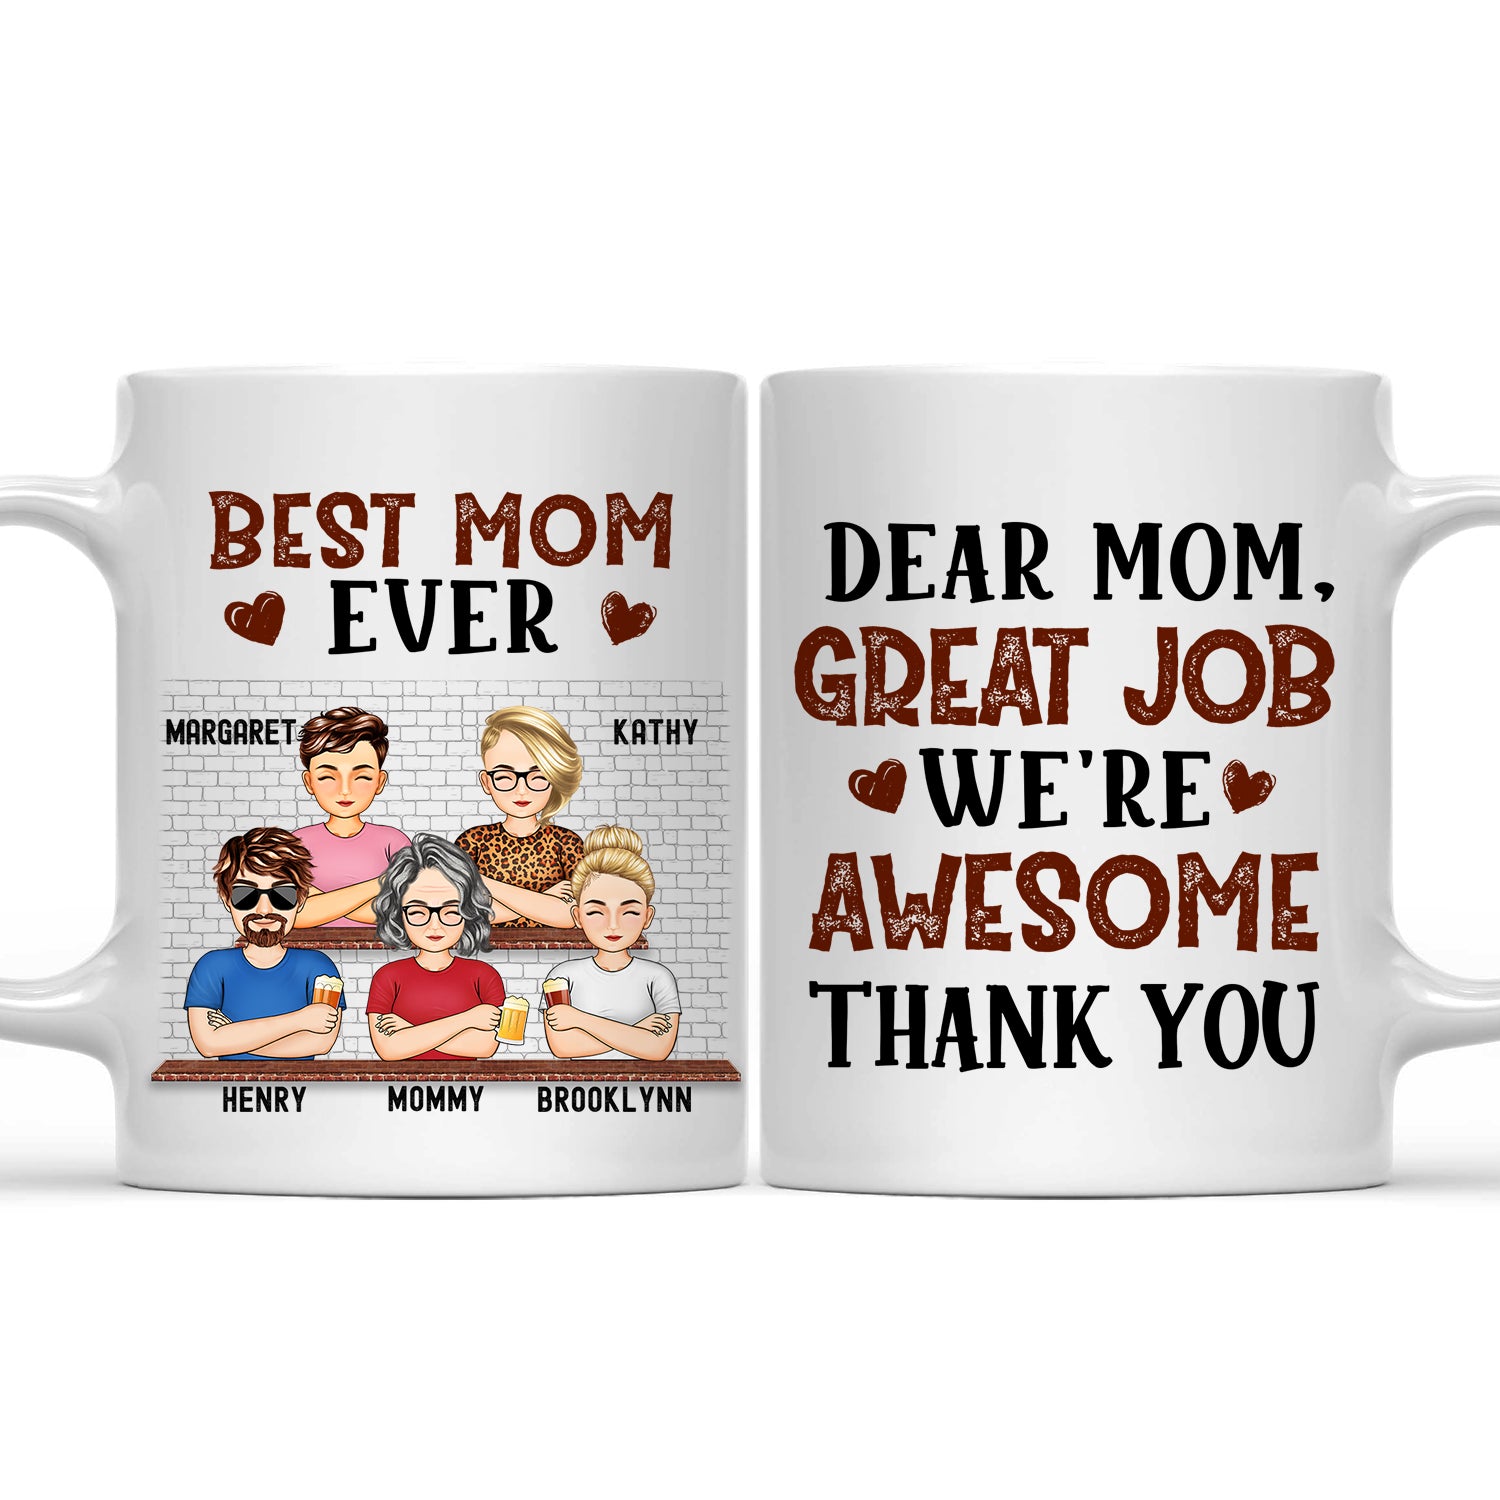 Dear Mom Great Job We're Awesome Thank You - Birthday, Loving Gift For Mommy, Mother, Grandma, Grandmother - Personalized Custom Mug